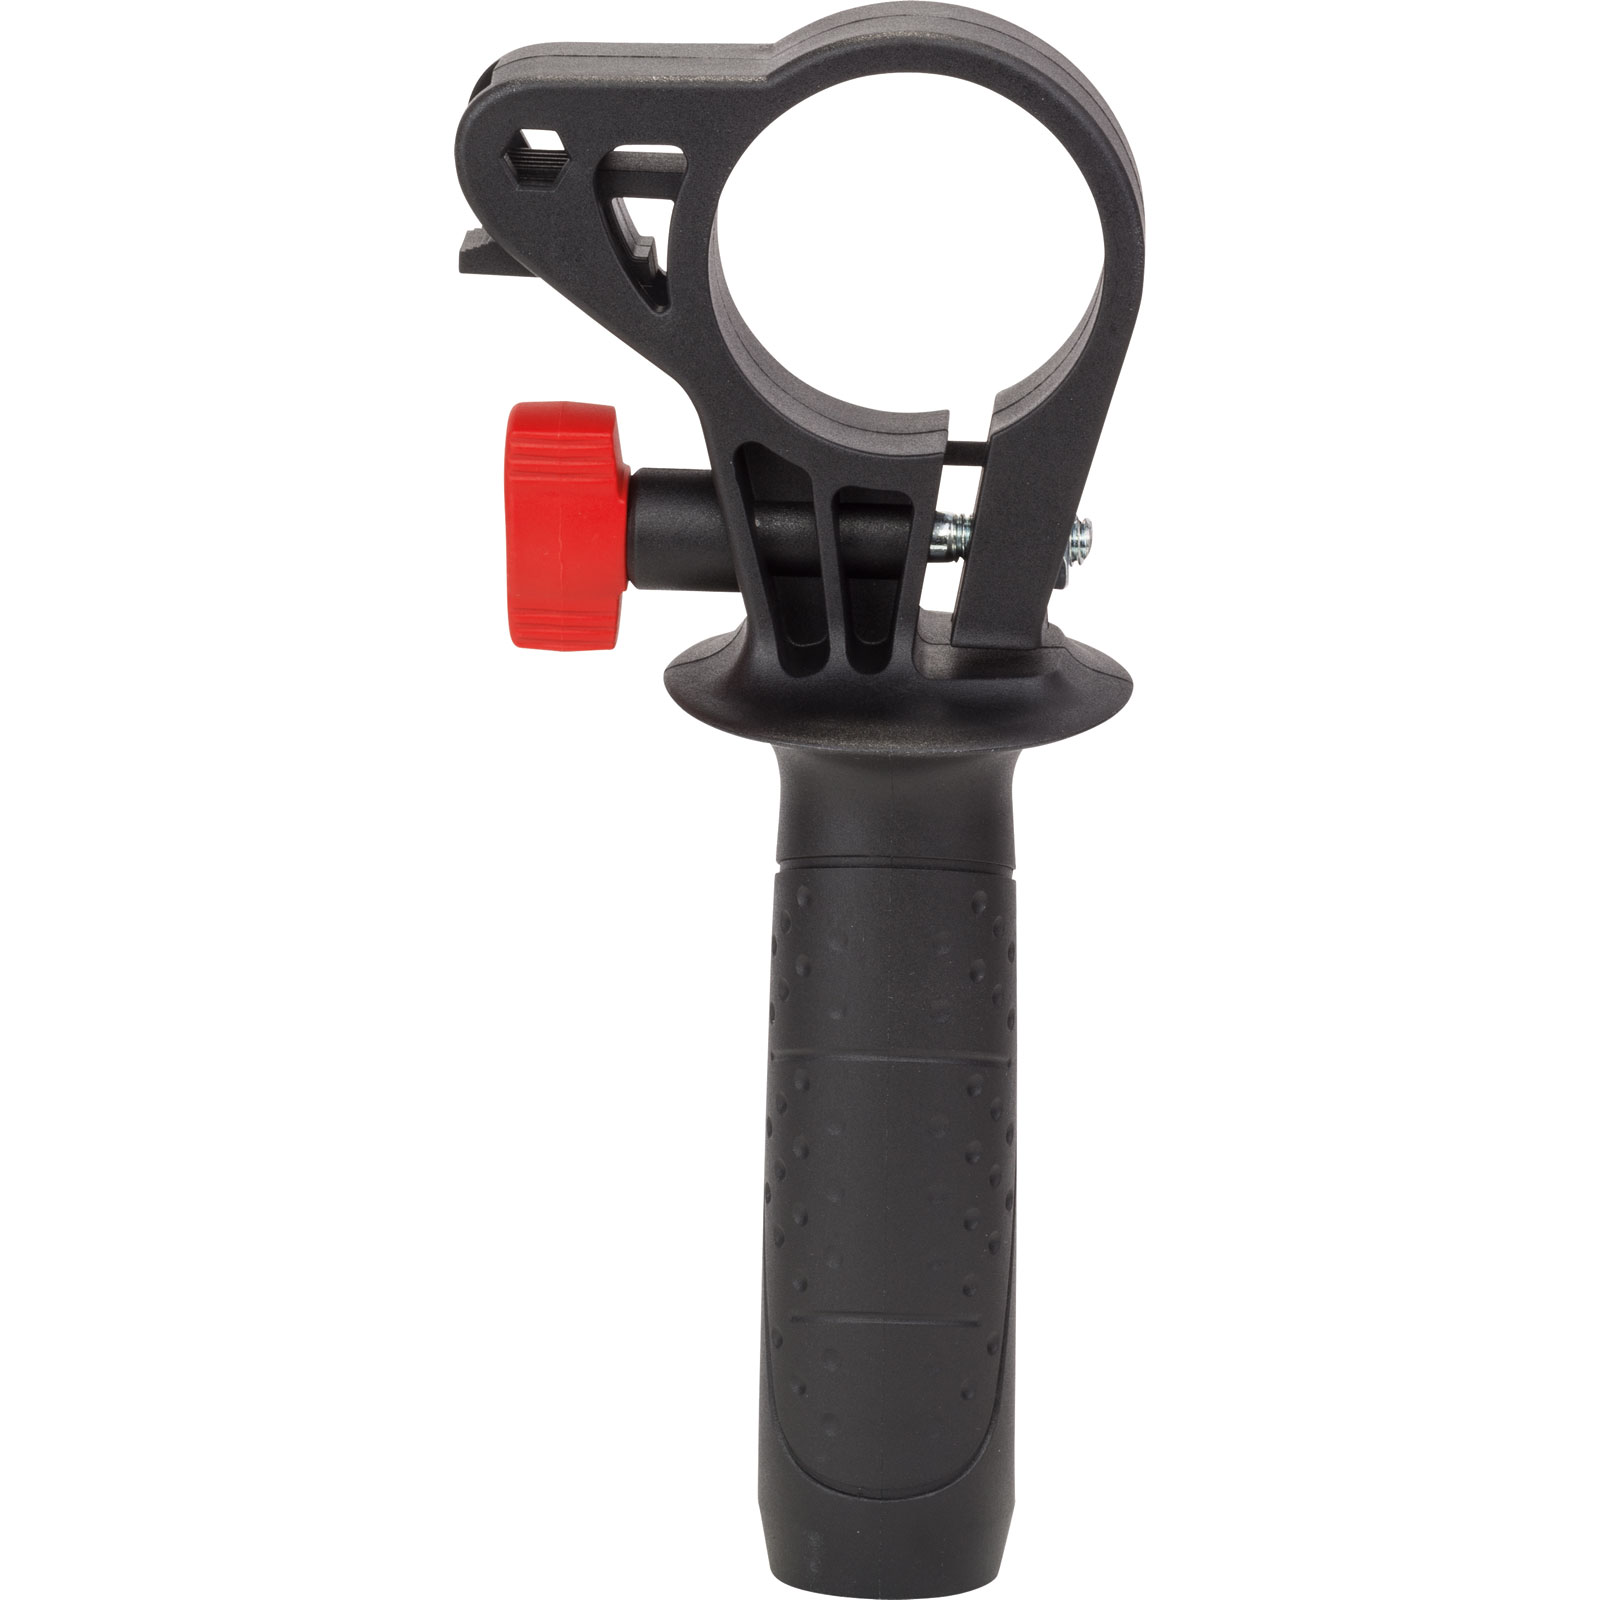 Image of Bosch Auxiliary Handle for PSB 500, 650 and 750 Hammer Drills